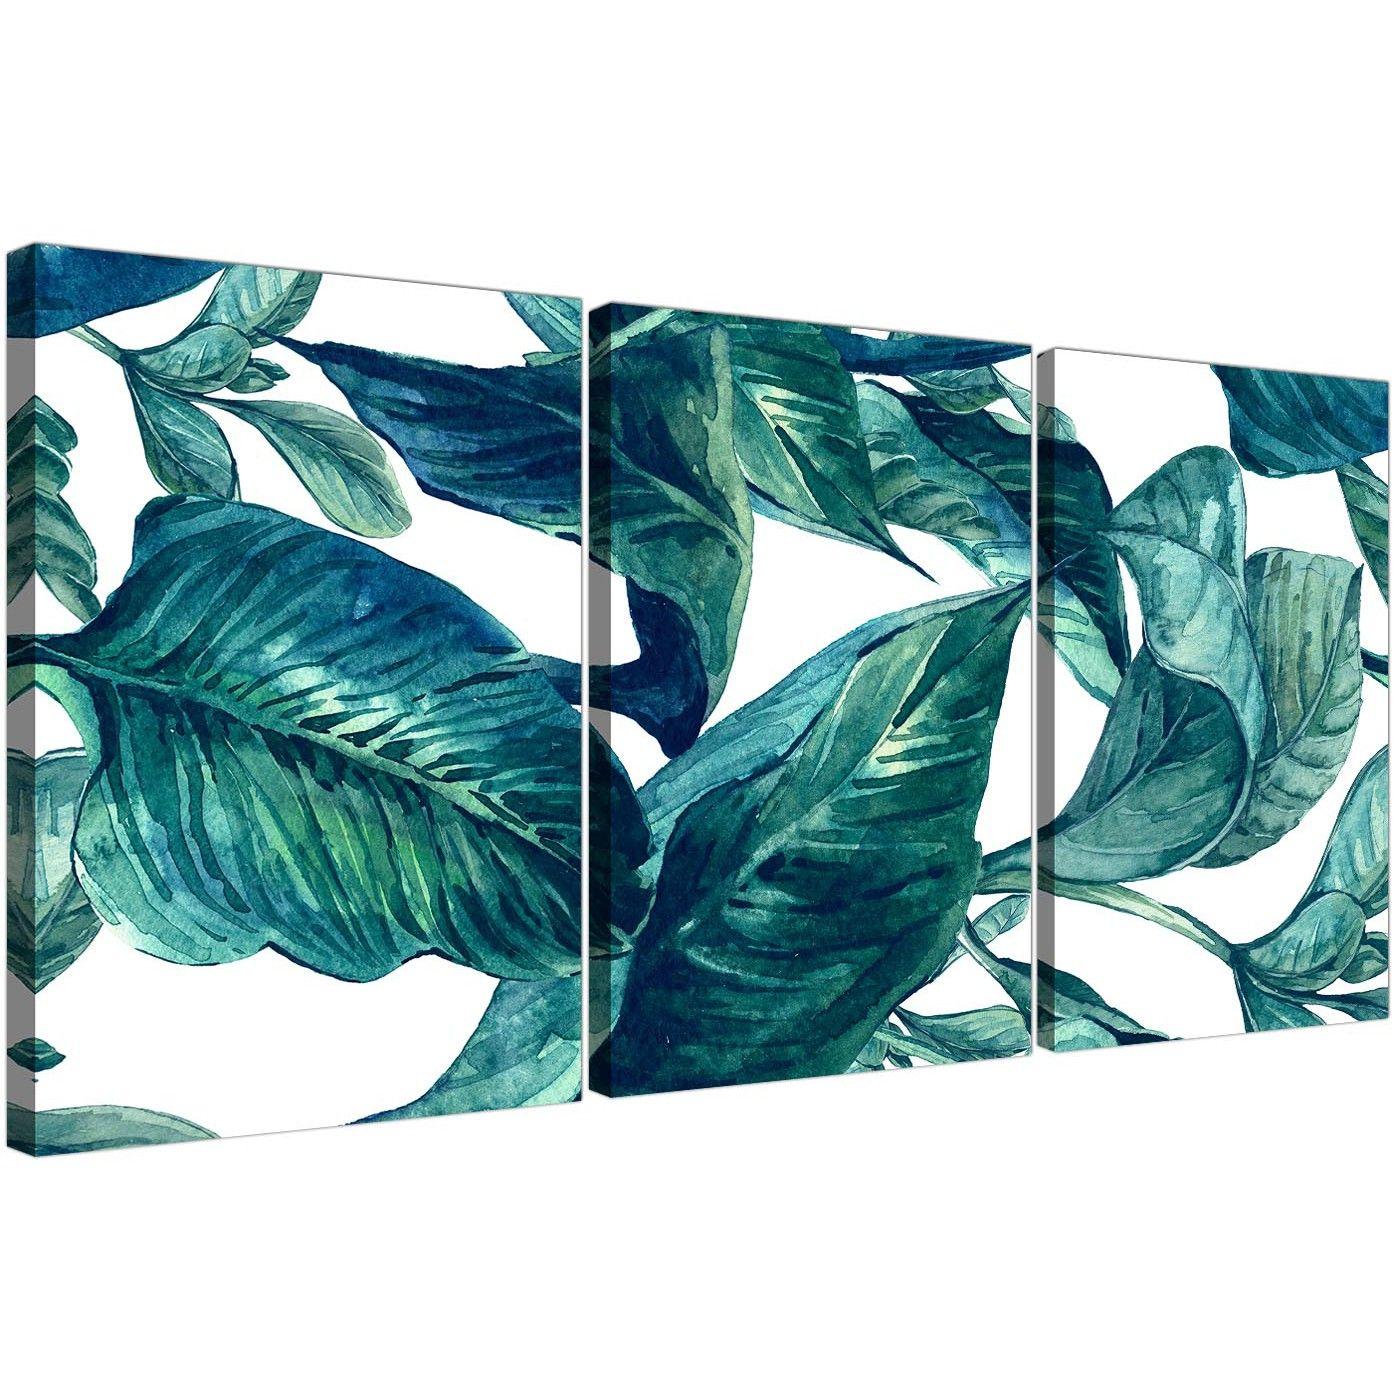 Blue and Green Leaf Logo - Teal Blue Green Tropical Exotic Leaves Canvas Wall Art Print - Multi ...